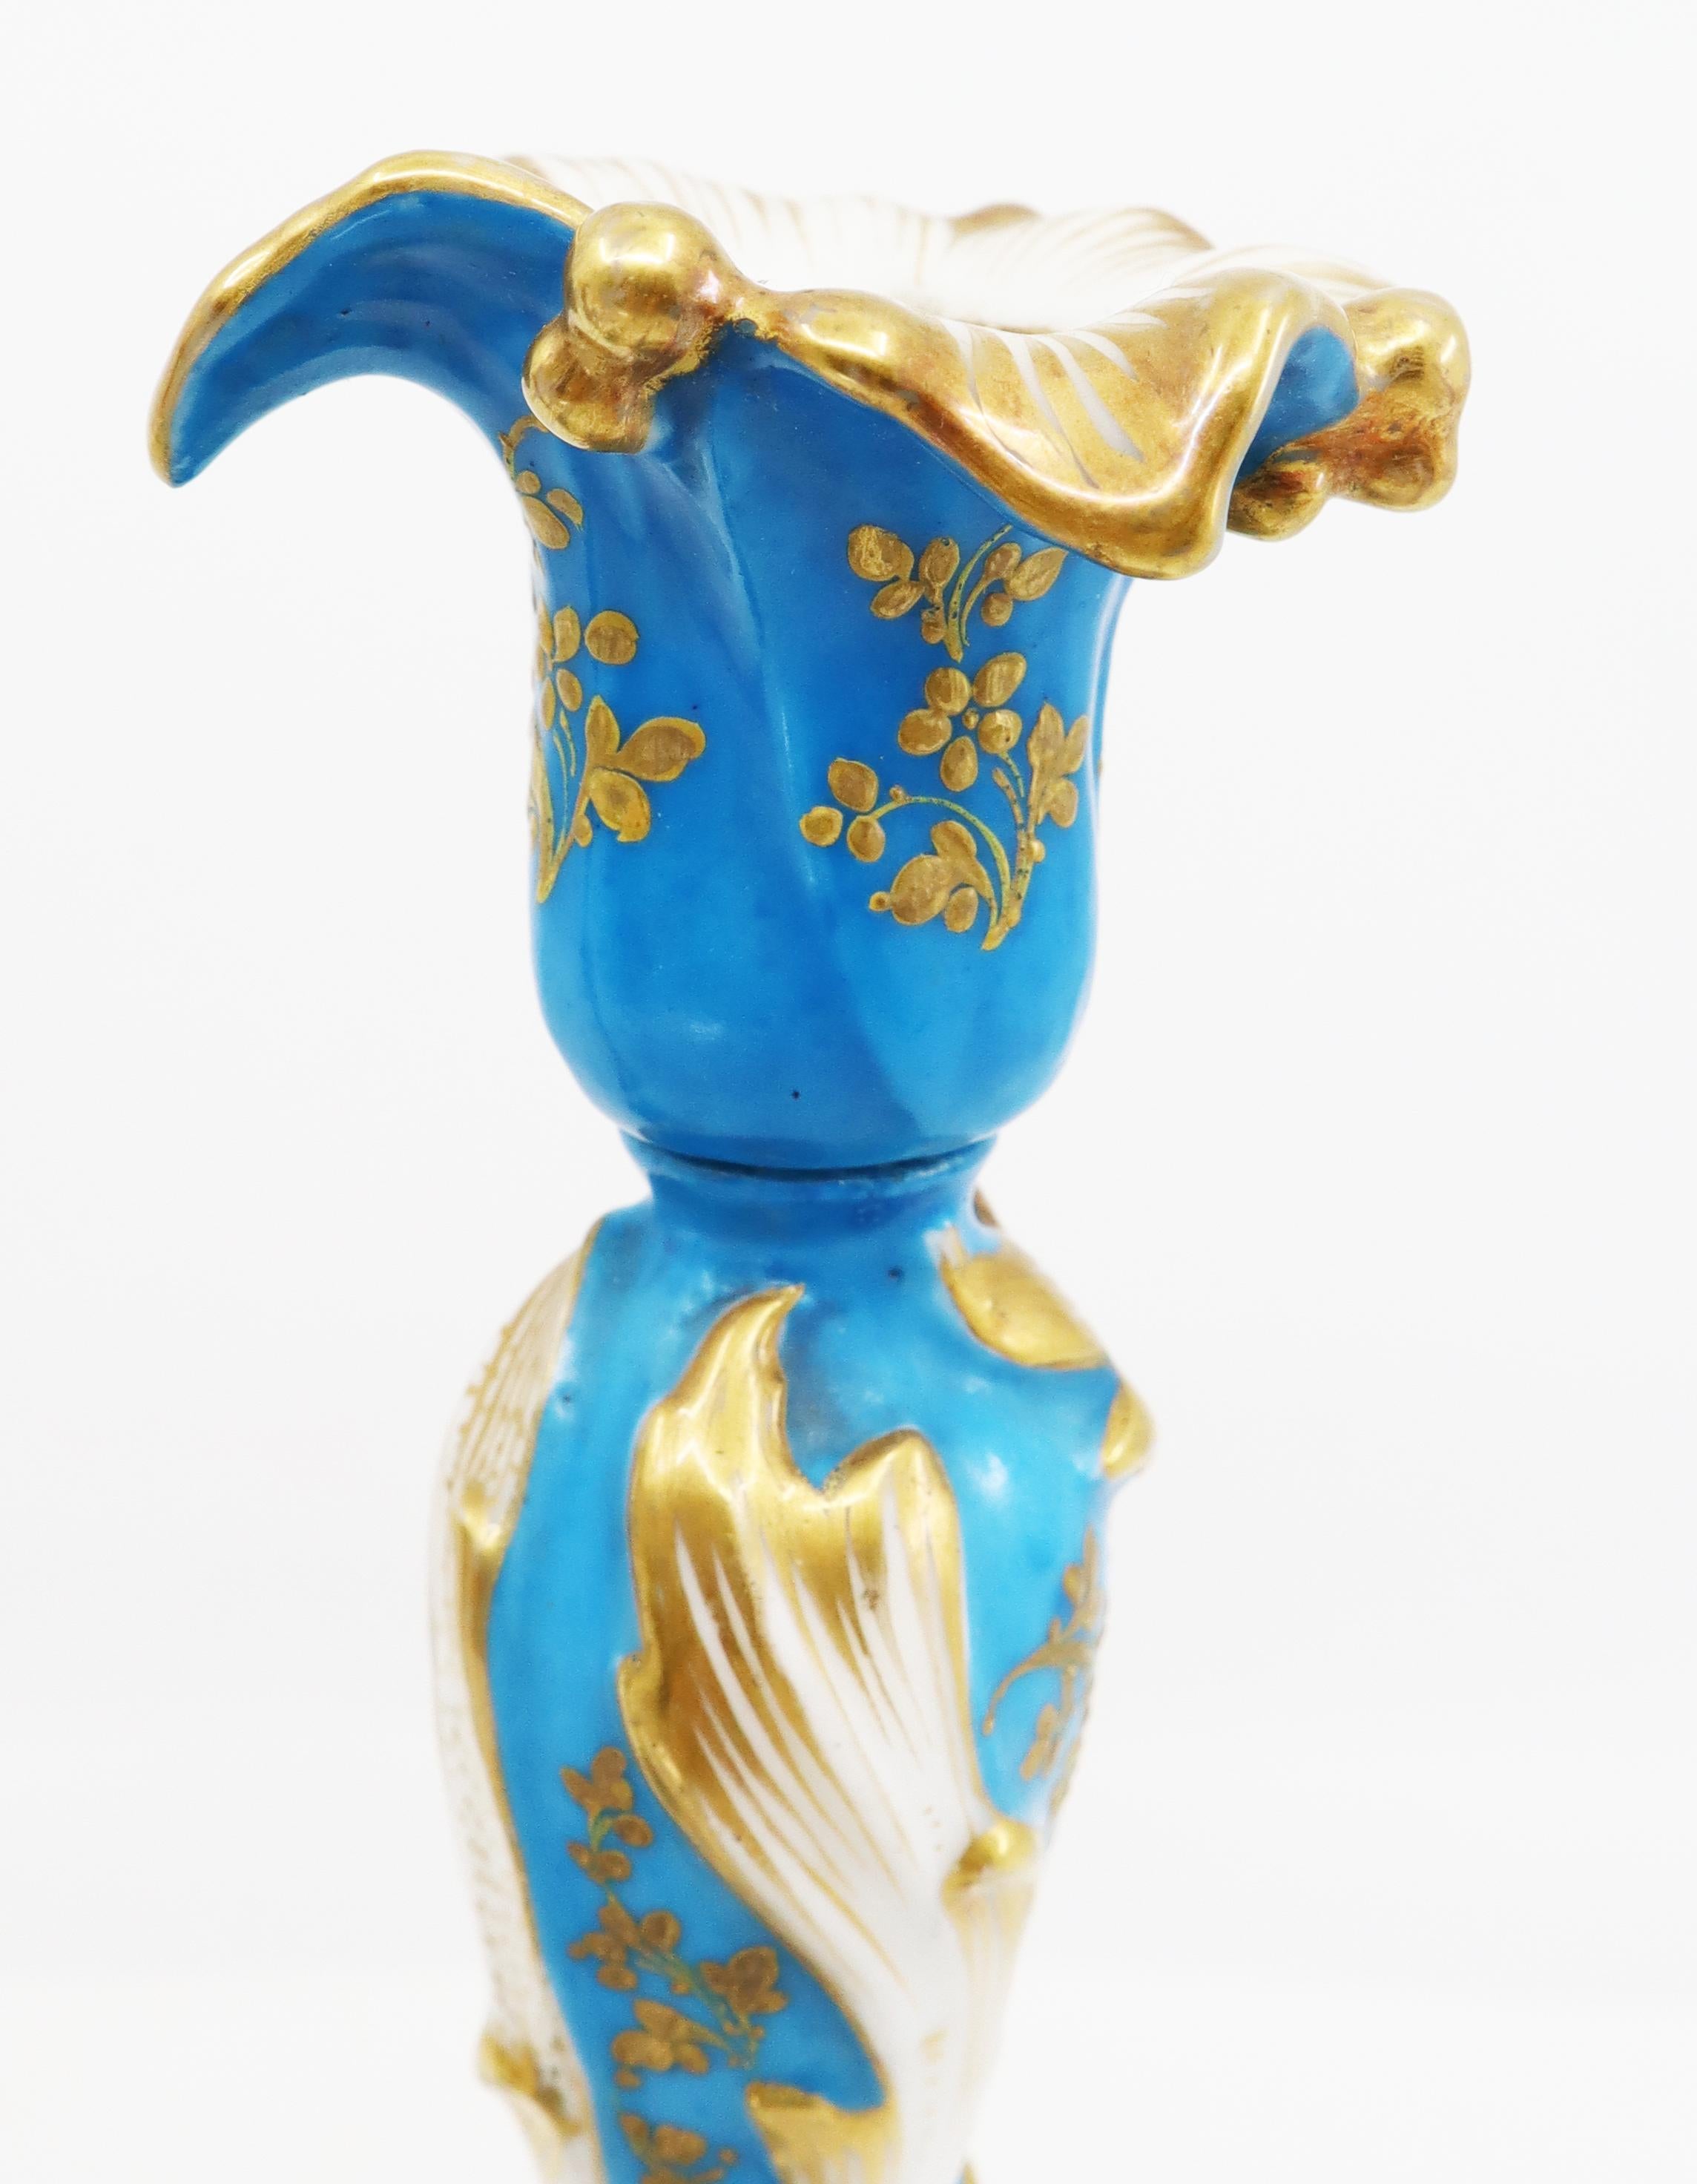 Candlestick, 19th century Paris French,
Decorated in the “Rococo” style with “C” and “S” scrolls and painted with gilded floral design.
Porcelain, hand painted, signed
Measure: Height 24 cm, diameter 15 cm. 

*Shipping included 
Free and fast